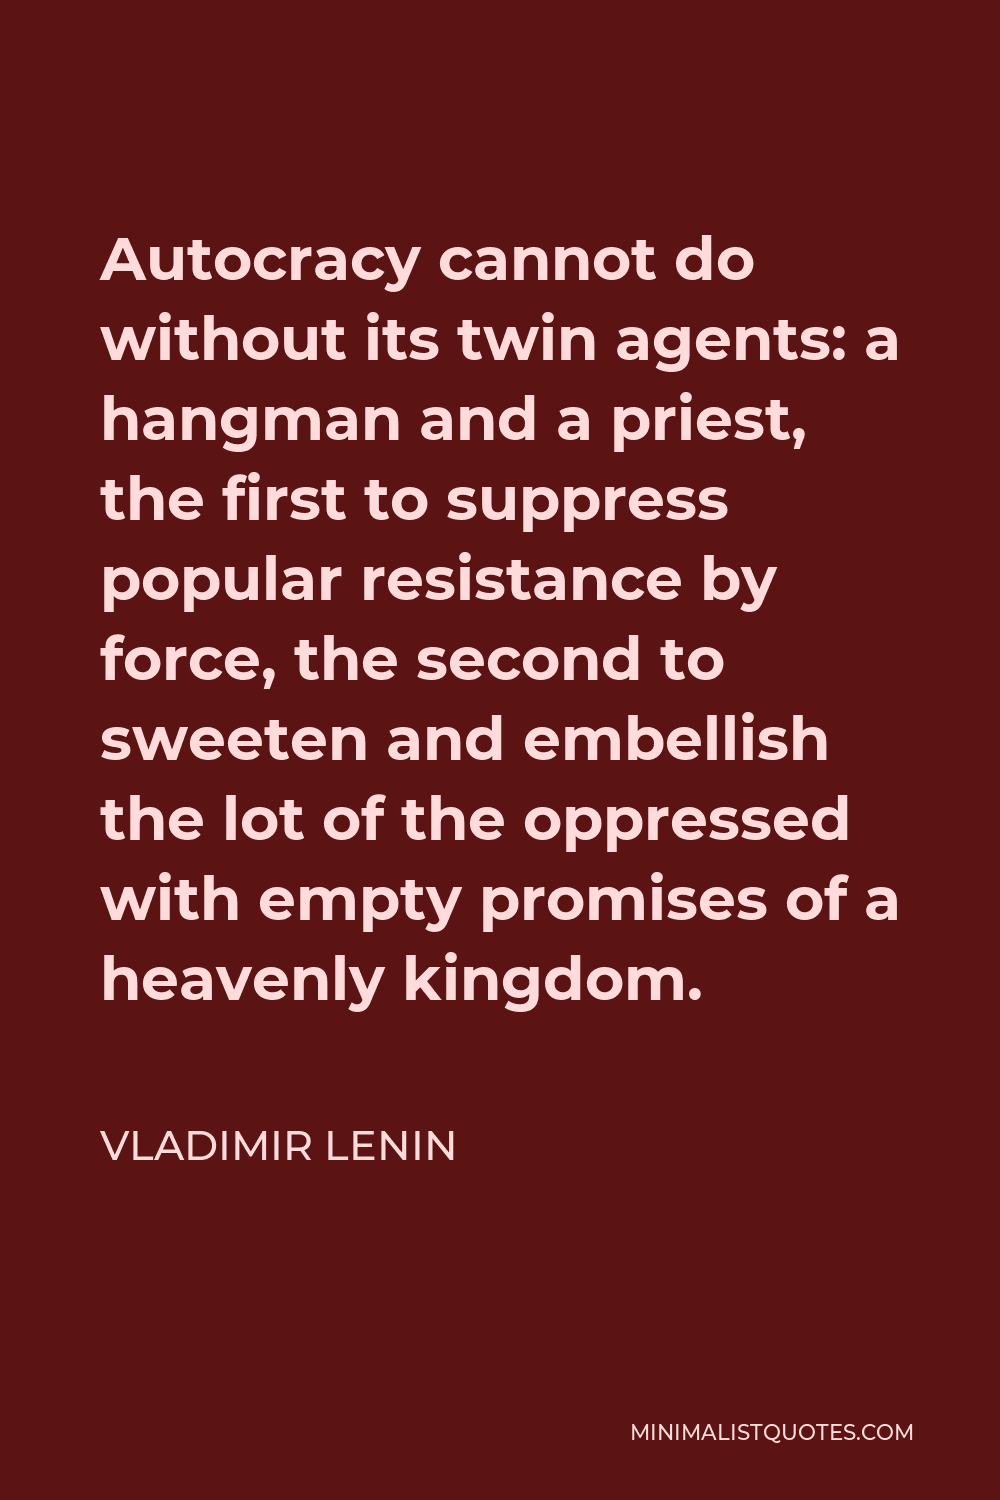 Vladimir Lenin Quote - Autocracy cannot do without its twin agents: a hangman and a priest, the first to suppress popular resistance by force, the second to sweeten and embellish the lot of the oppressed with empty promises of a heavenly kingdom.